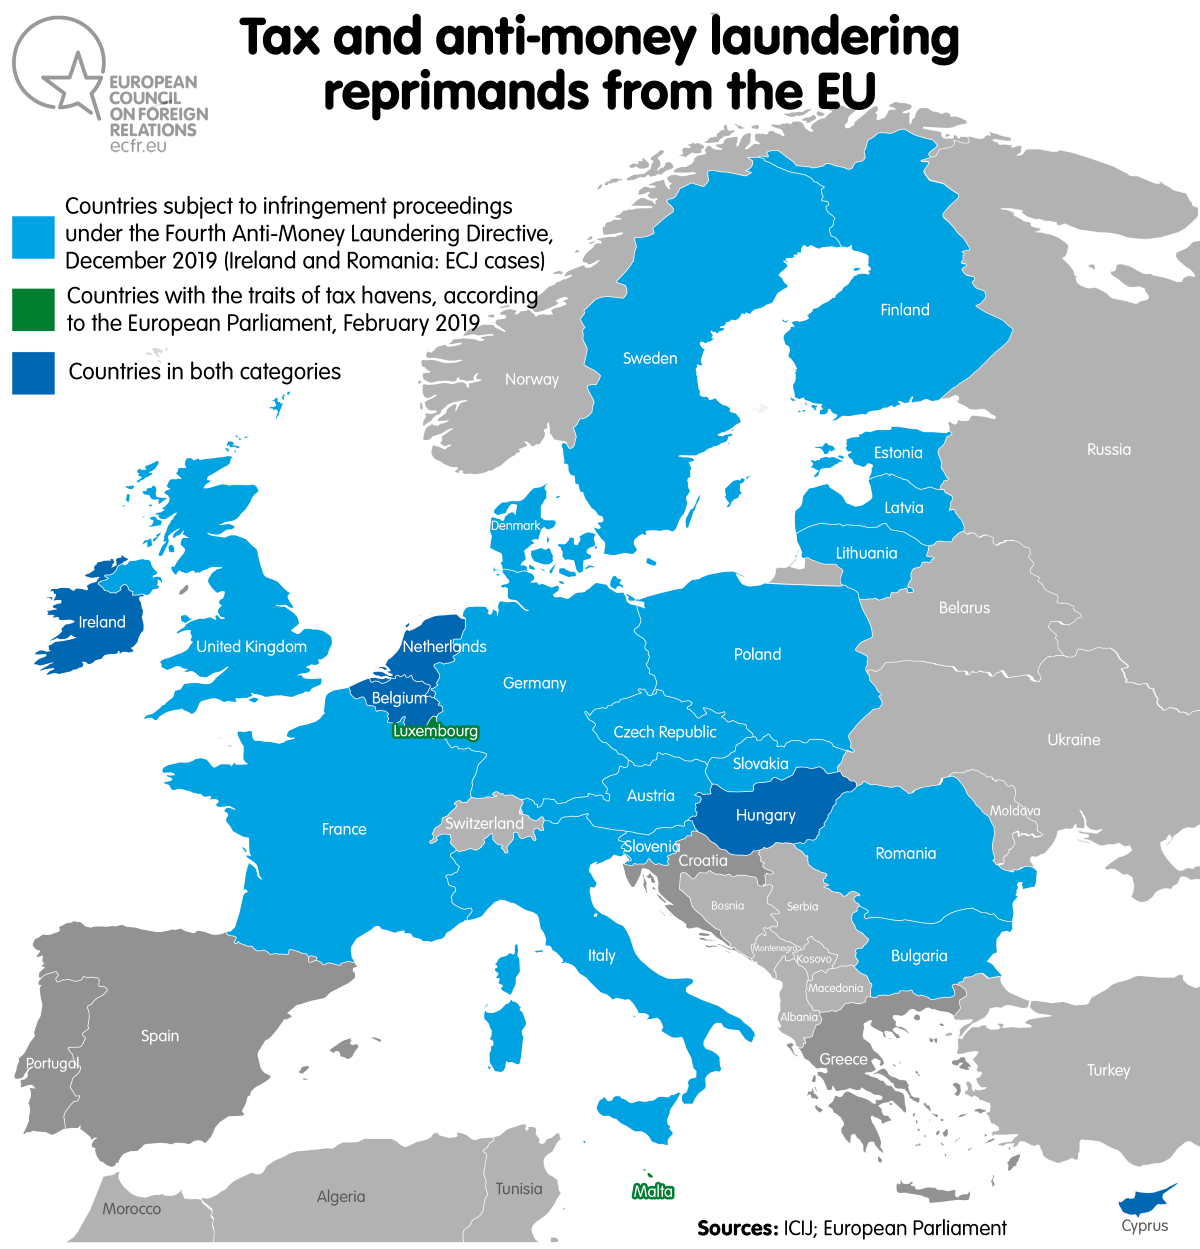 Map: Tax and anti-money laundering reprimands from the EU